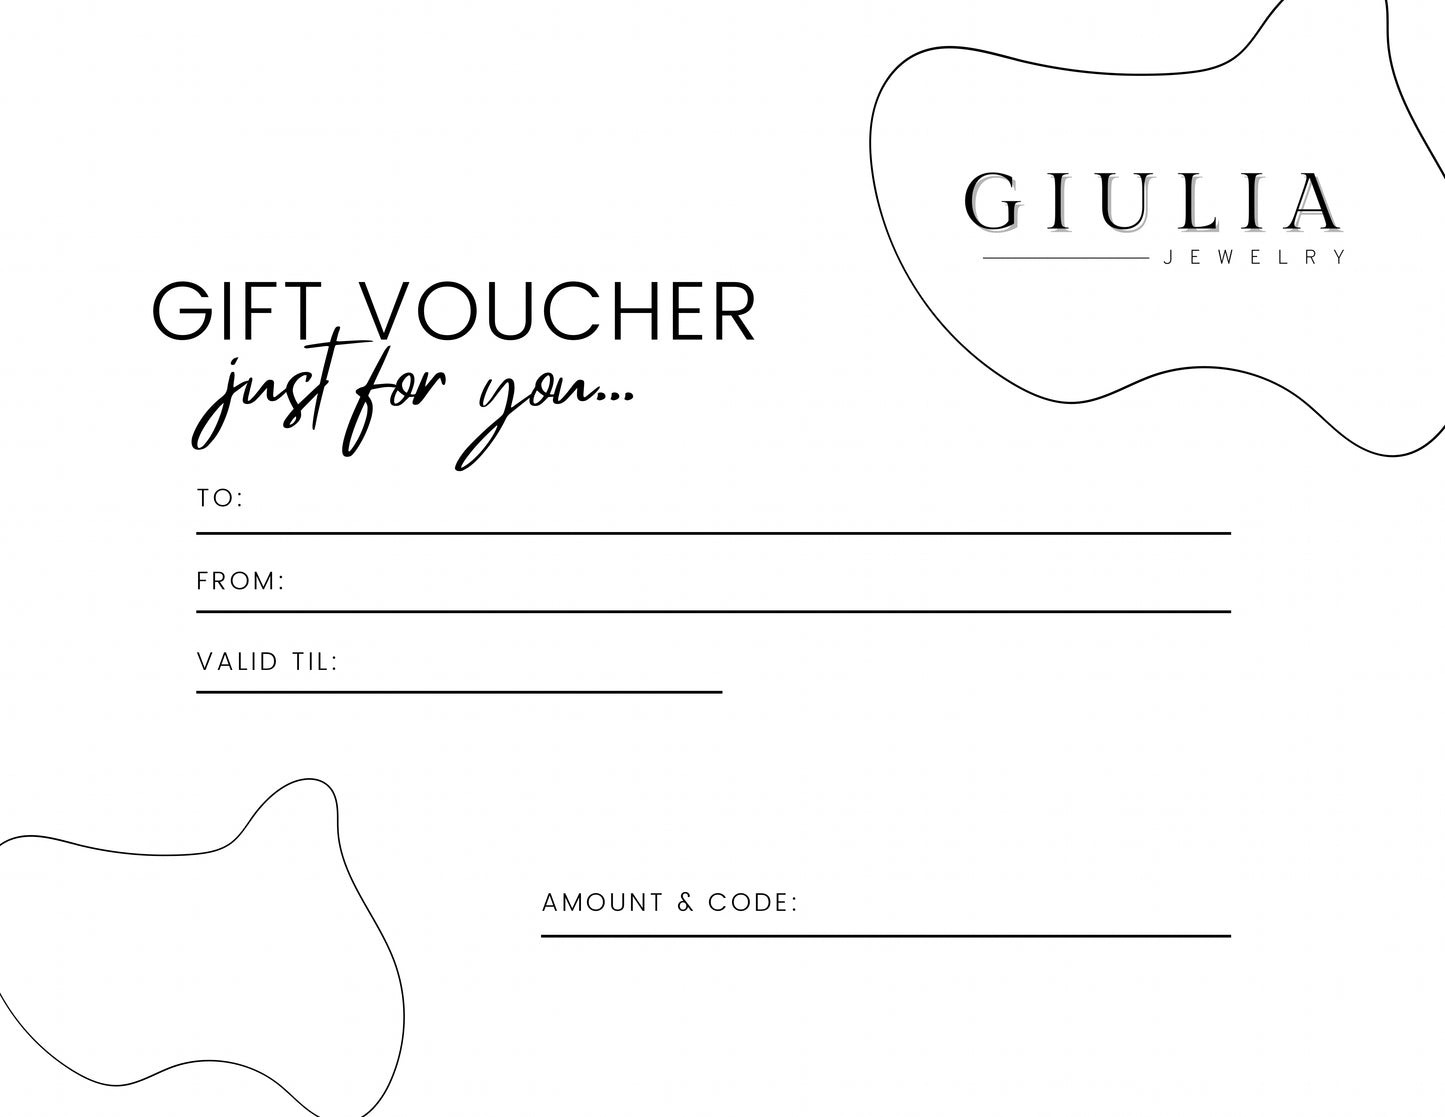 Gift Voucher by Mail